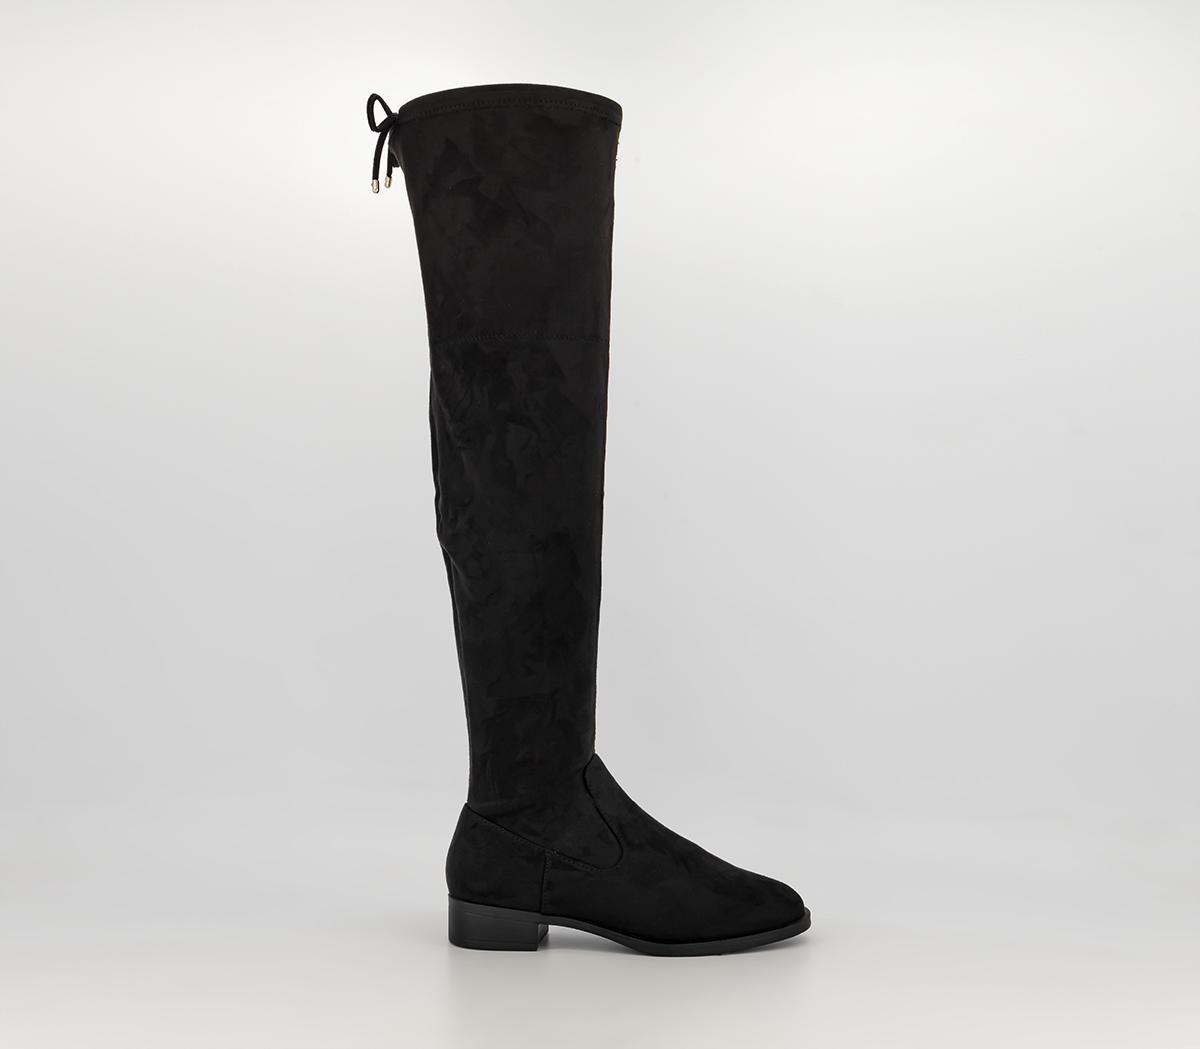 OFFICEWide Fit Kai Stretch Over The Knee BootsBlack